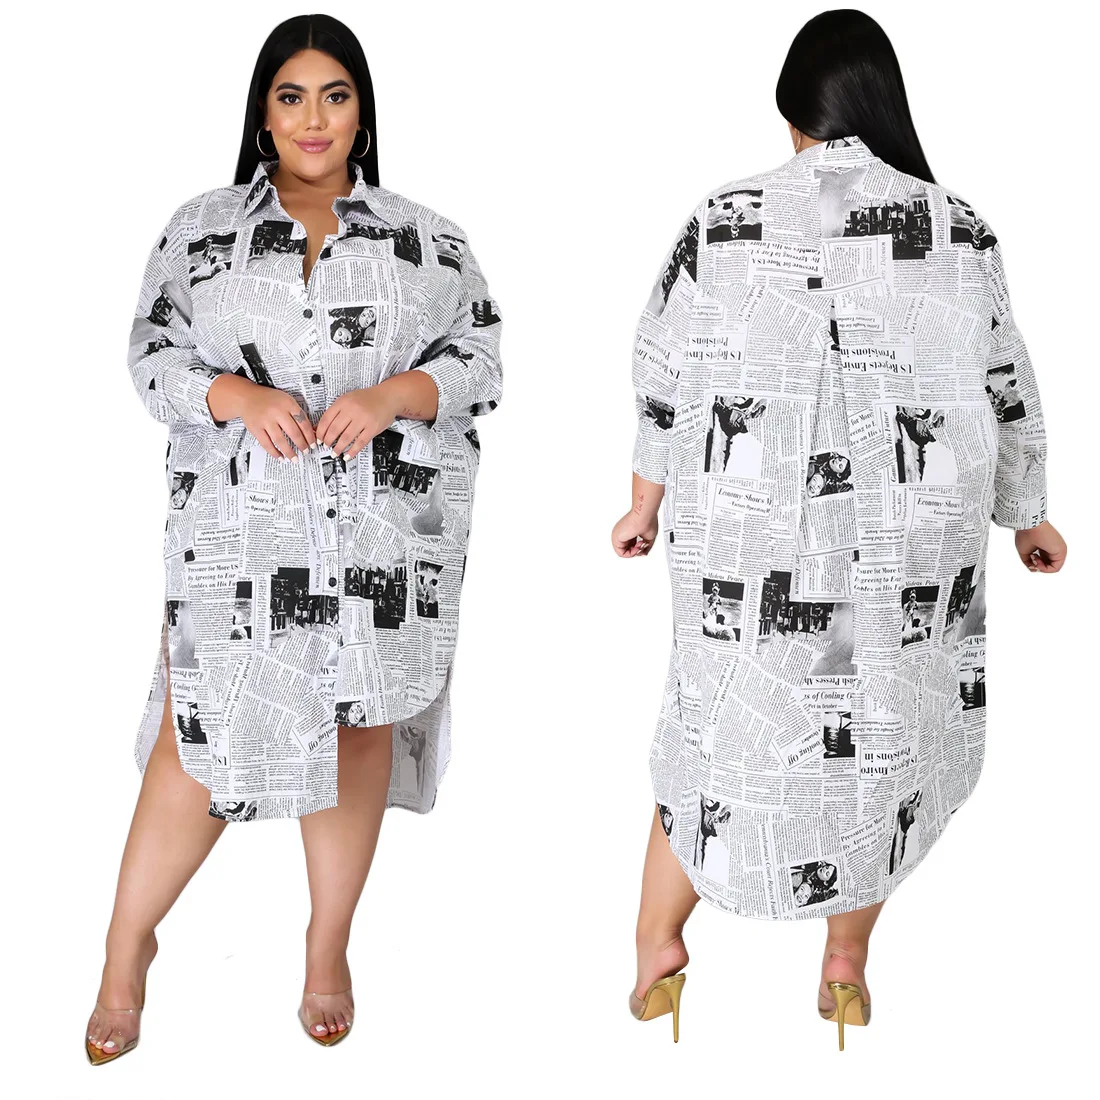 

2021 new arrivals fashion plus size women's clothing Newspaper printed shirt dress